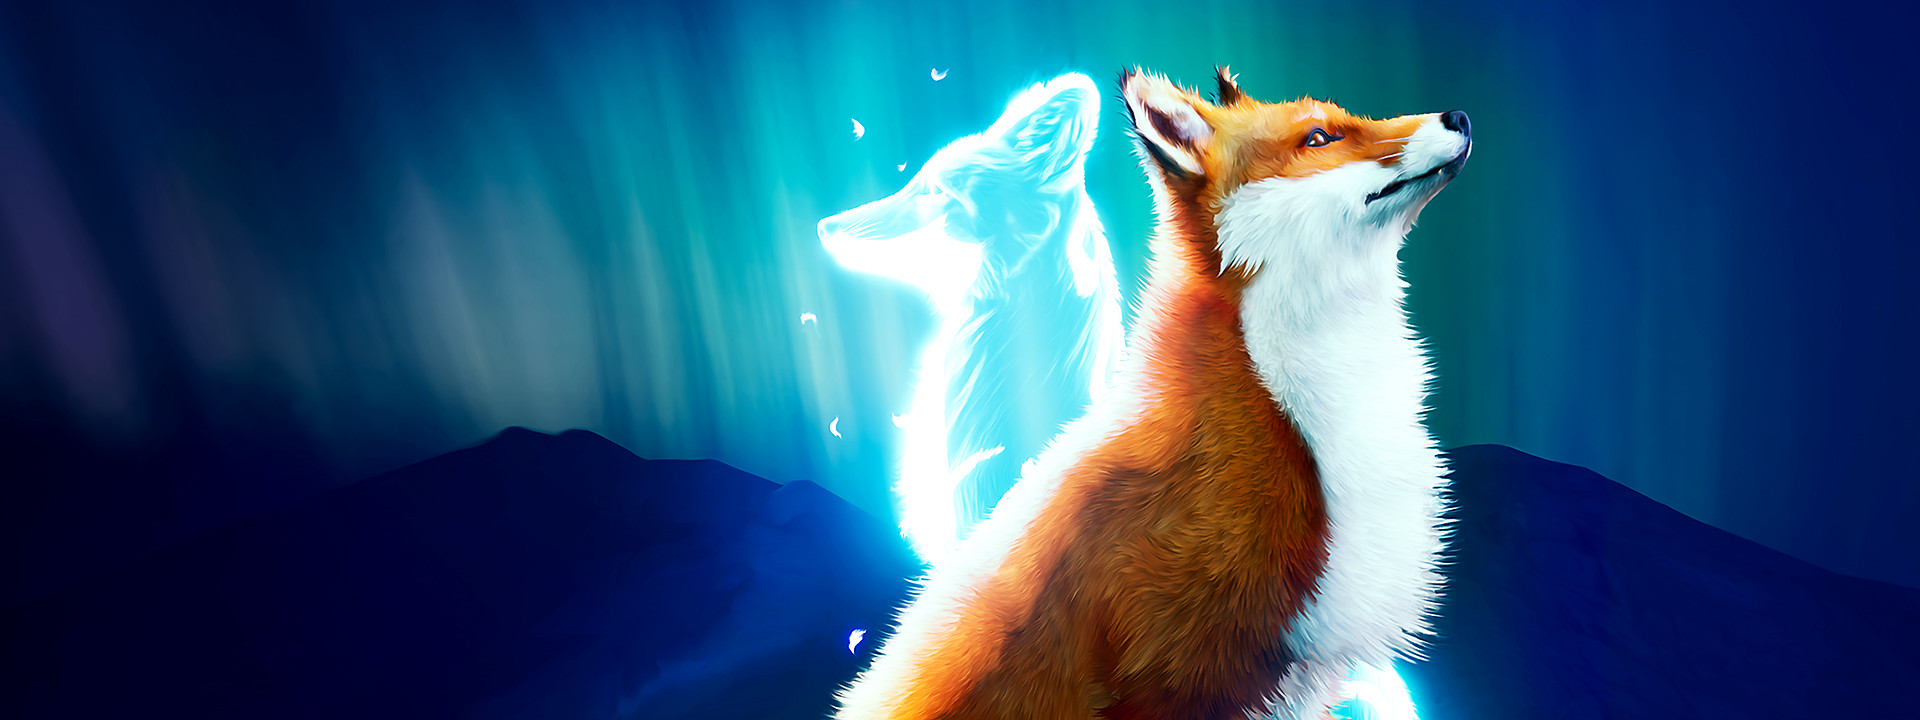 Best indie games of May: Spirit of the North, Sparklite and more titles